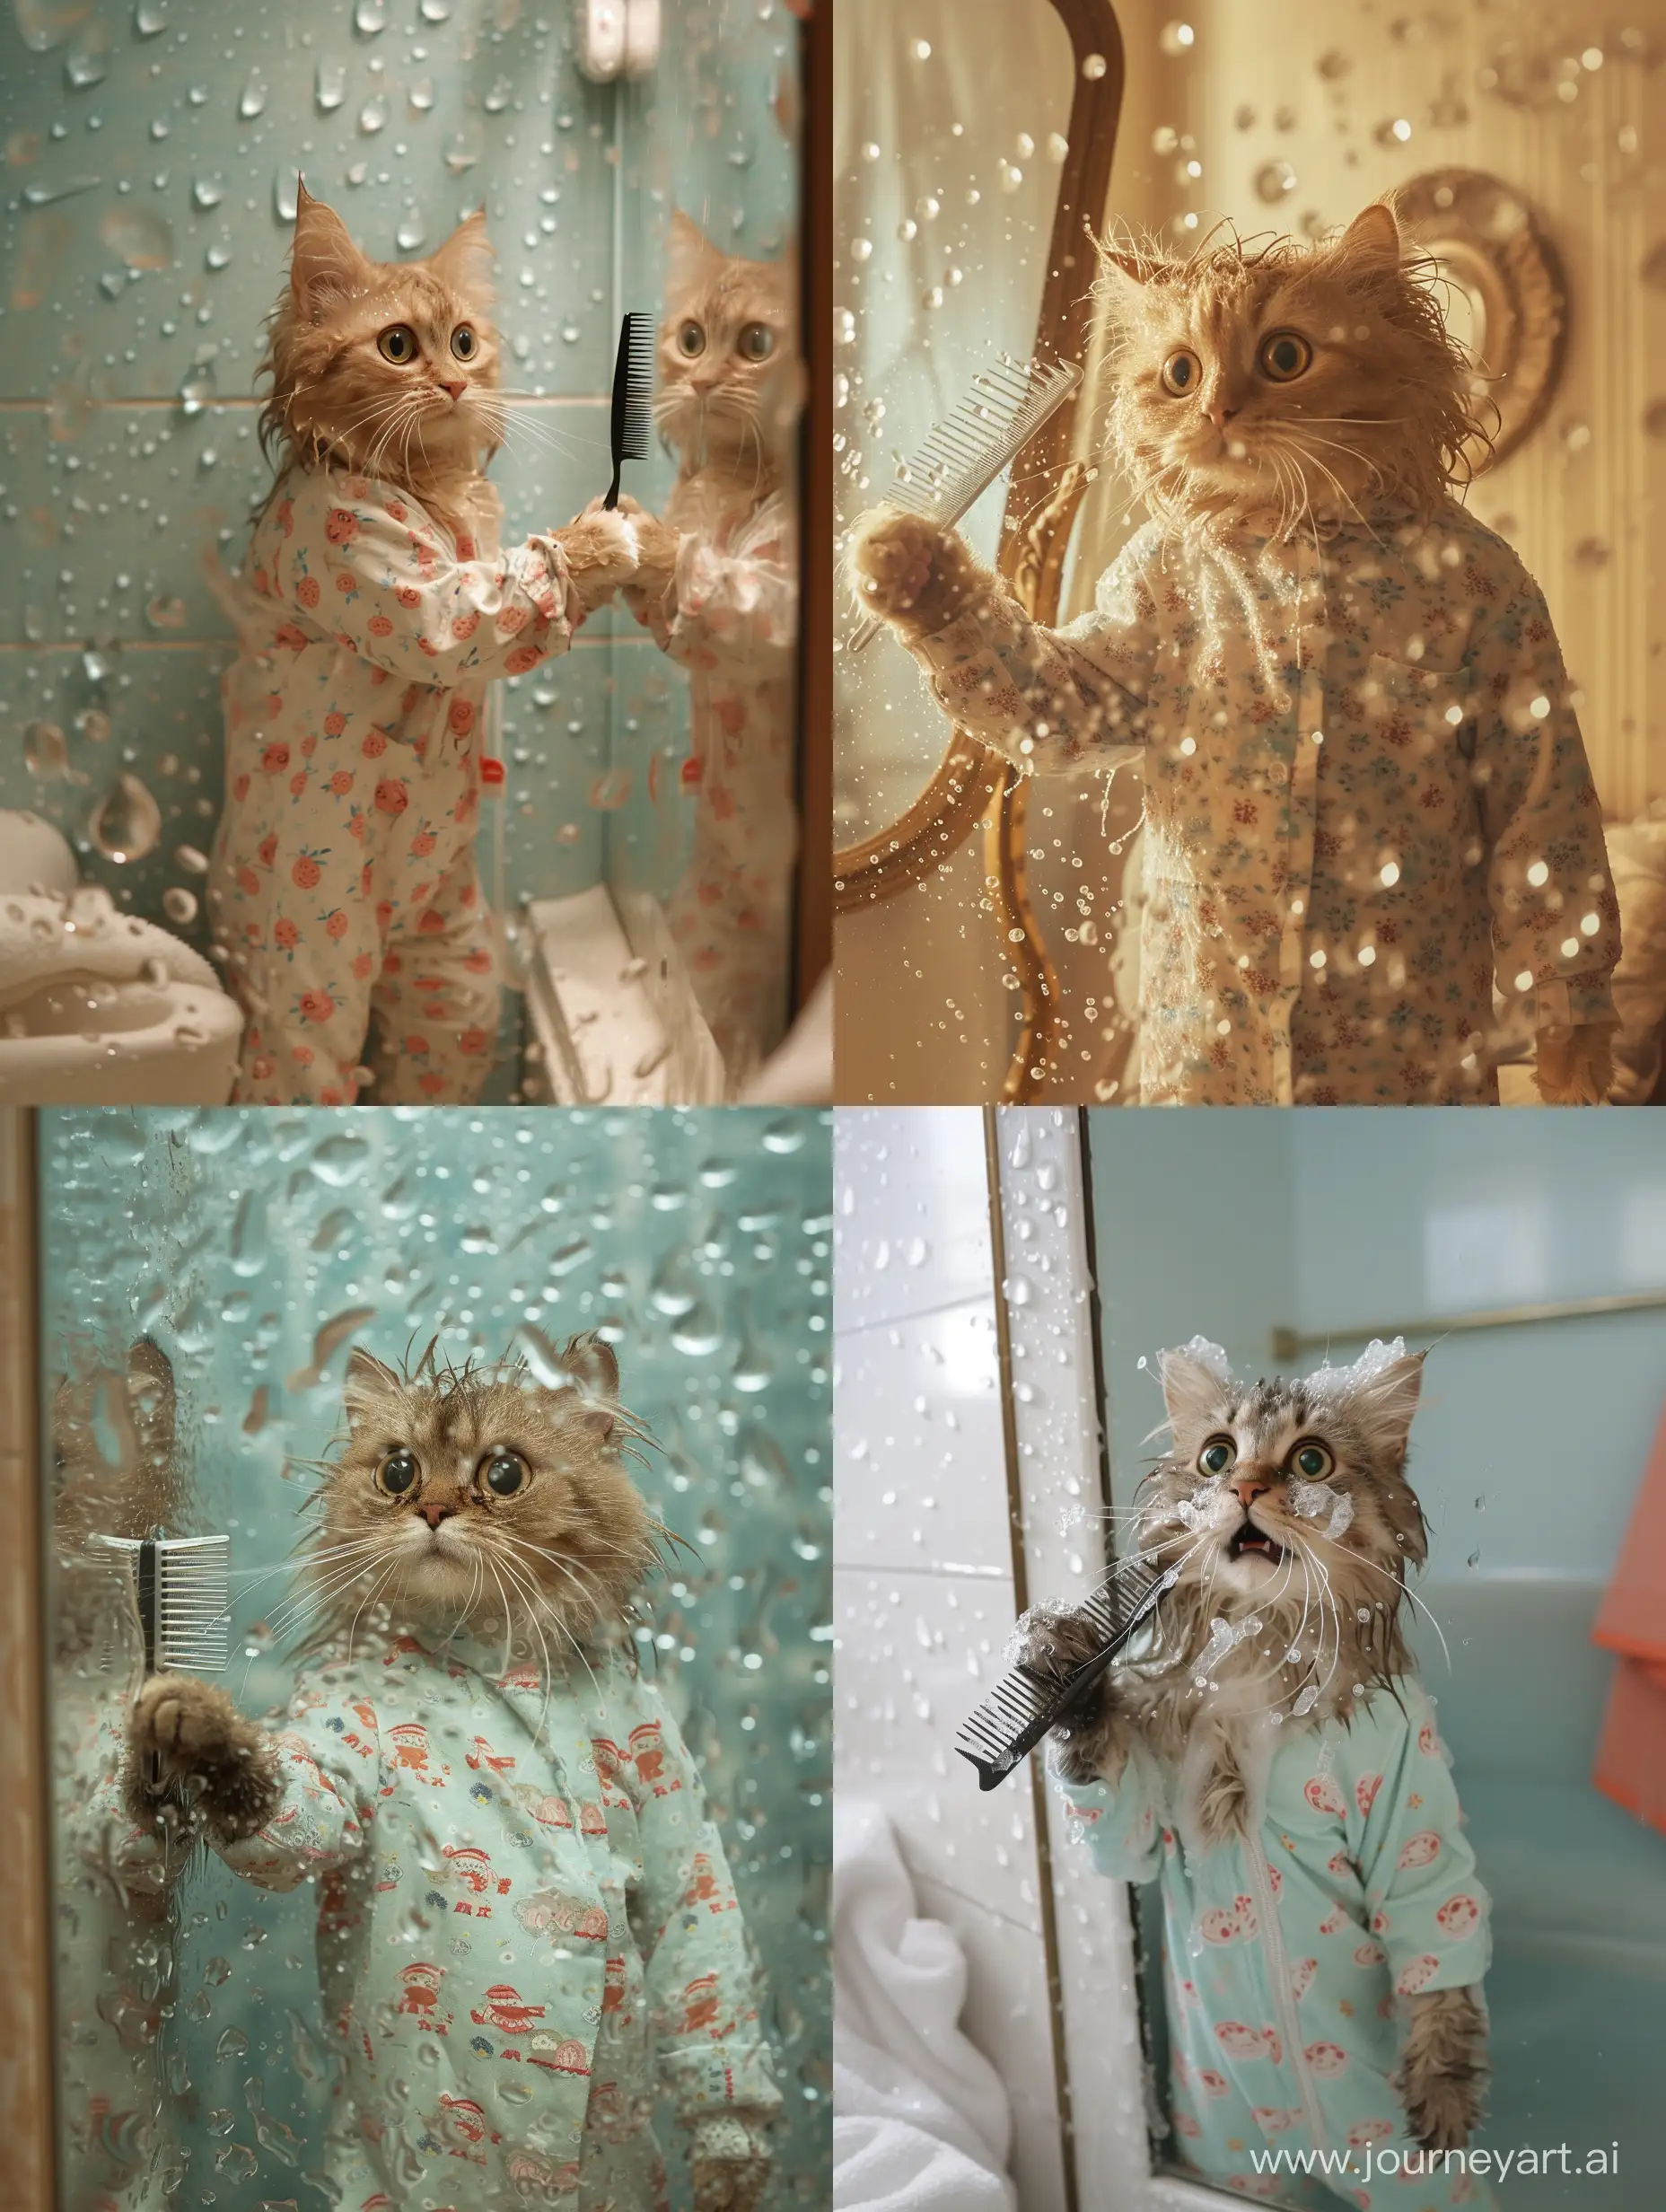 Cat-in-Pajamas-Contemplates-Reflection-in-Wet-Bathroom